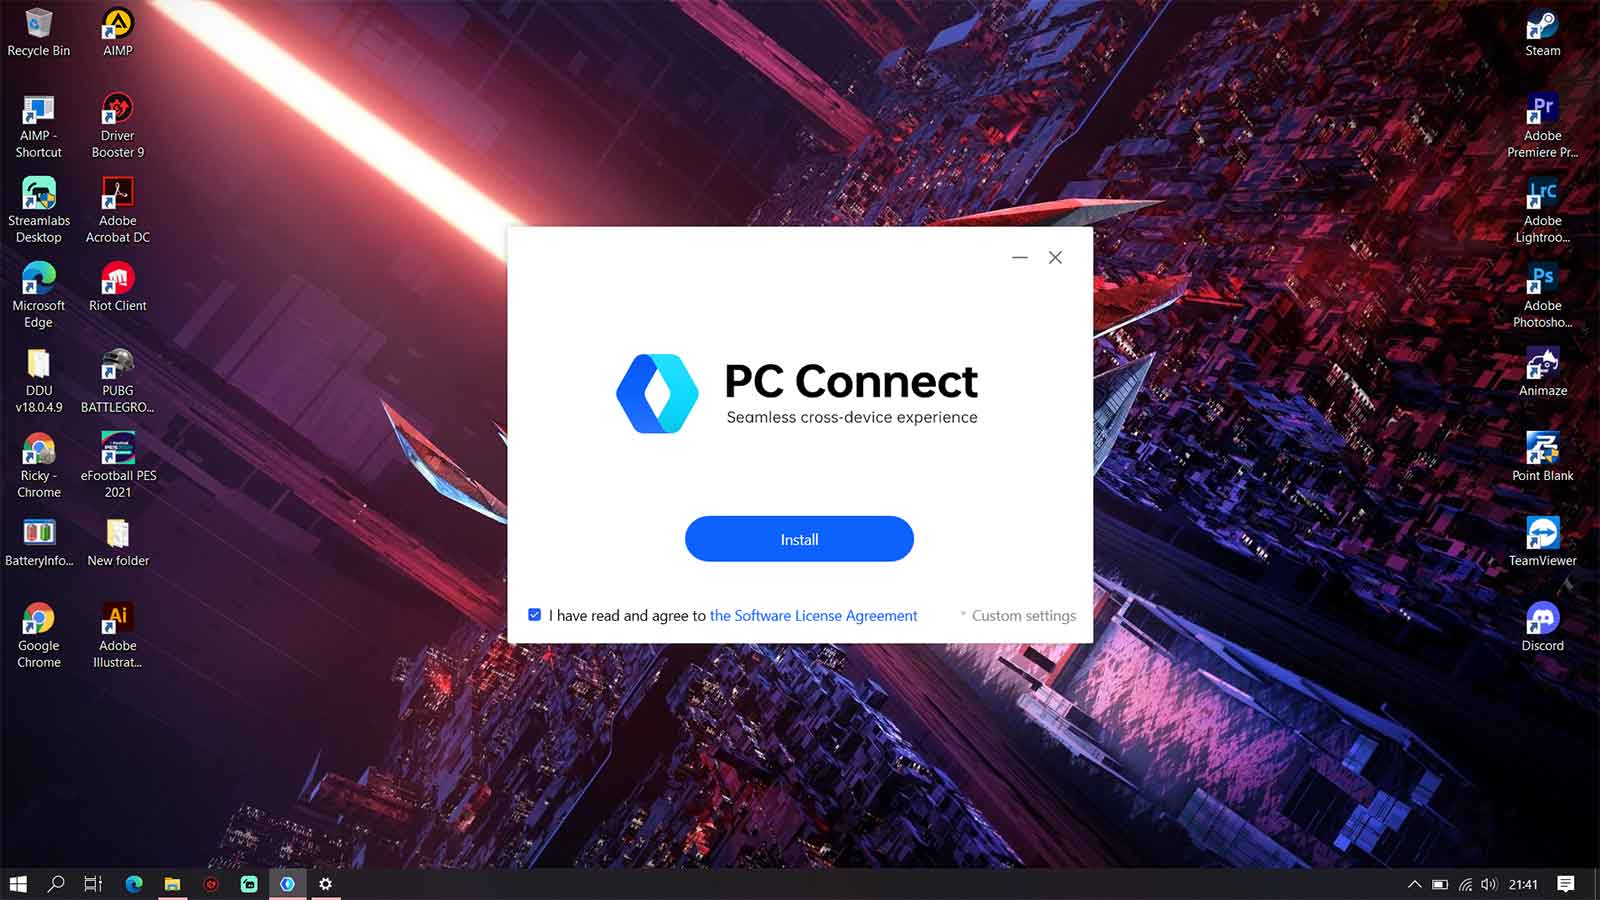 PC Connect